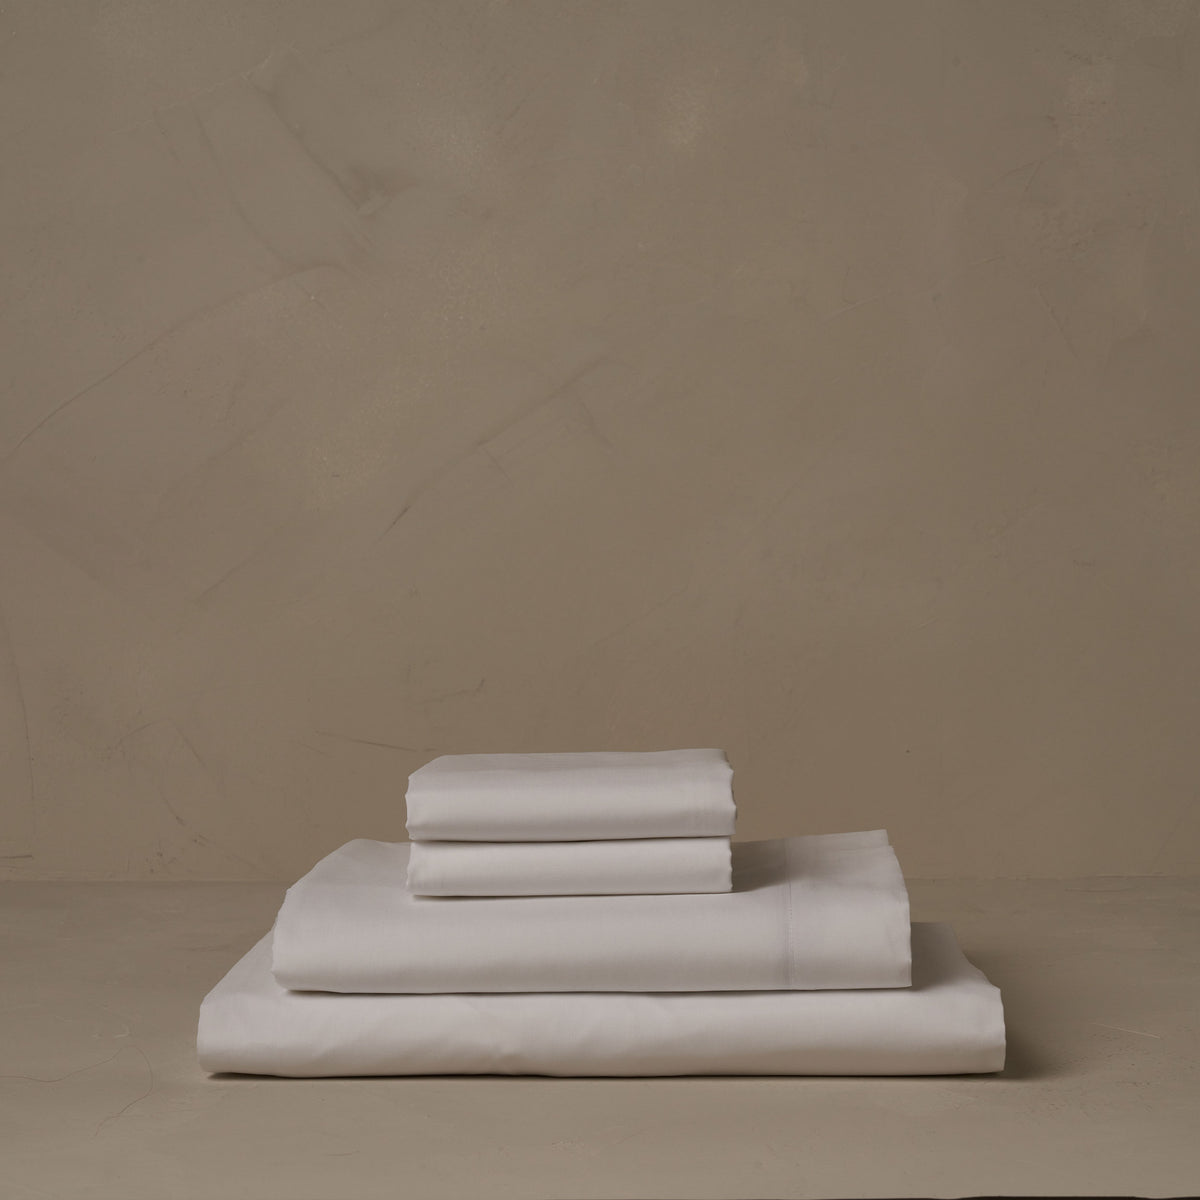 A stack of ultra soft and cool LETTO Sea Island Cotton Percale sheets in white, made in Italy. The sheet set includes a fitted sheet, a flat sheet, and a pair of pillowcases. data-image-id=